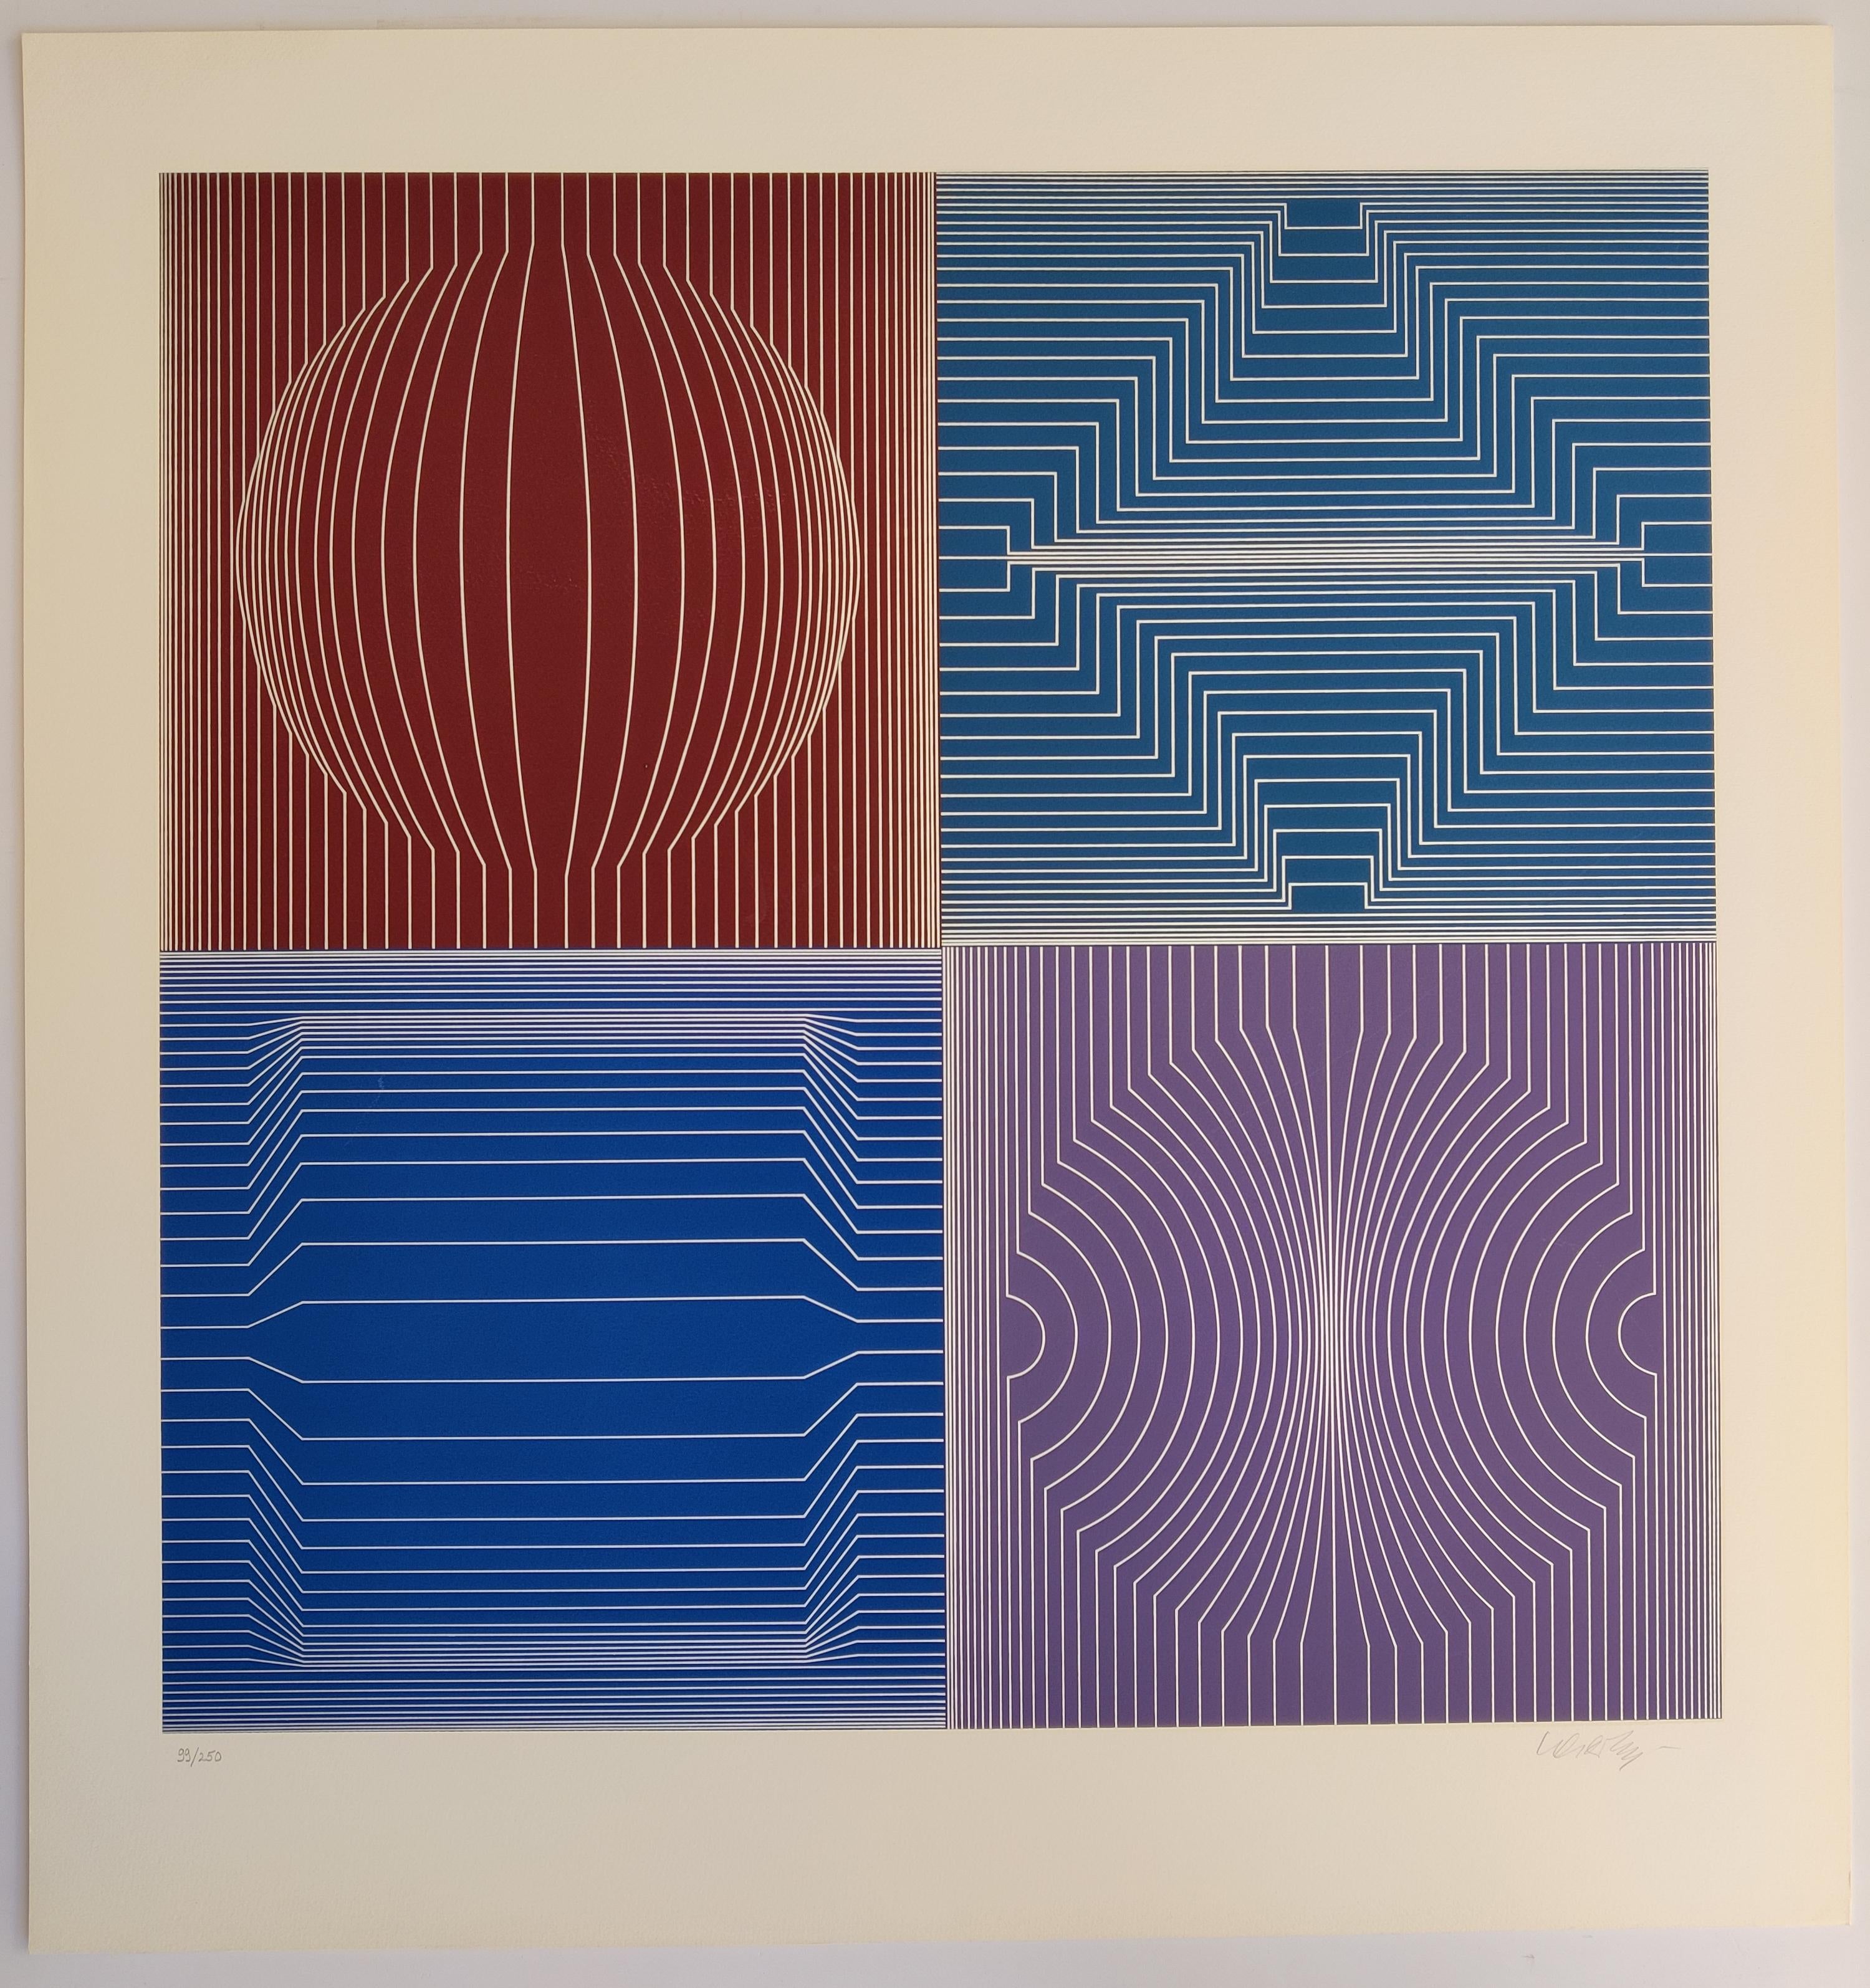 Victor Vasarely 
Tokyo,  1982
Hand signed lower right 
Edition: 99/250 in pencil
Image size: 65 x 65 cm
Sheet size: 79.5 x 75.8 cm

